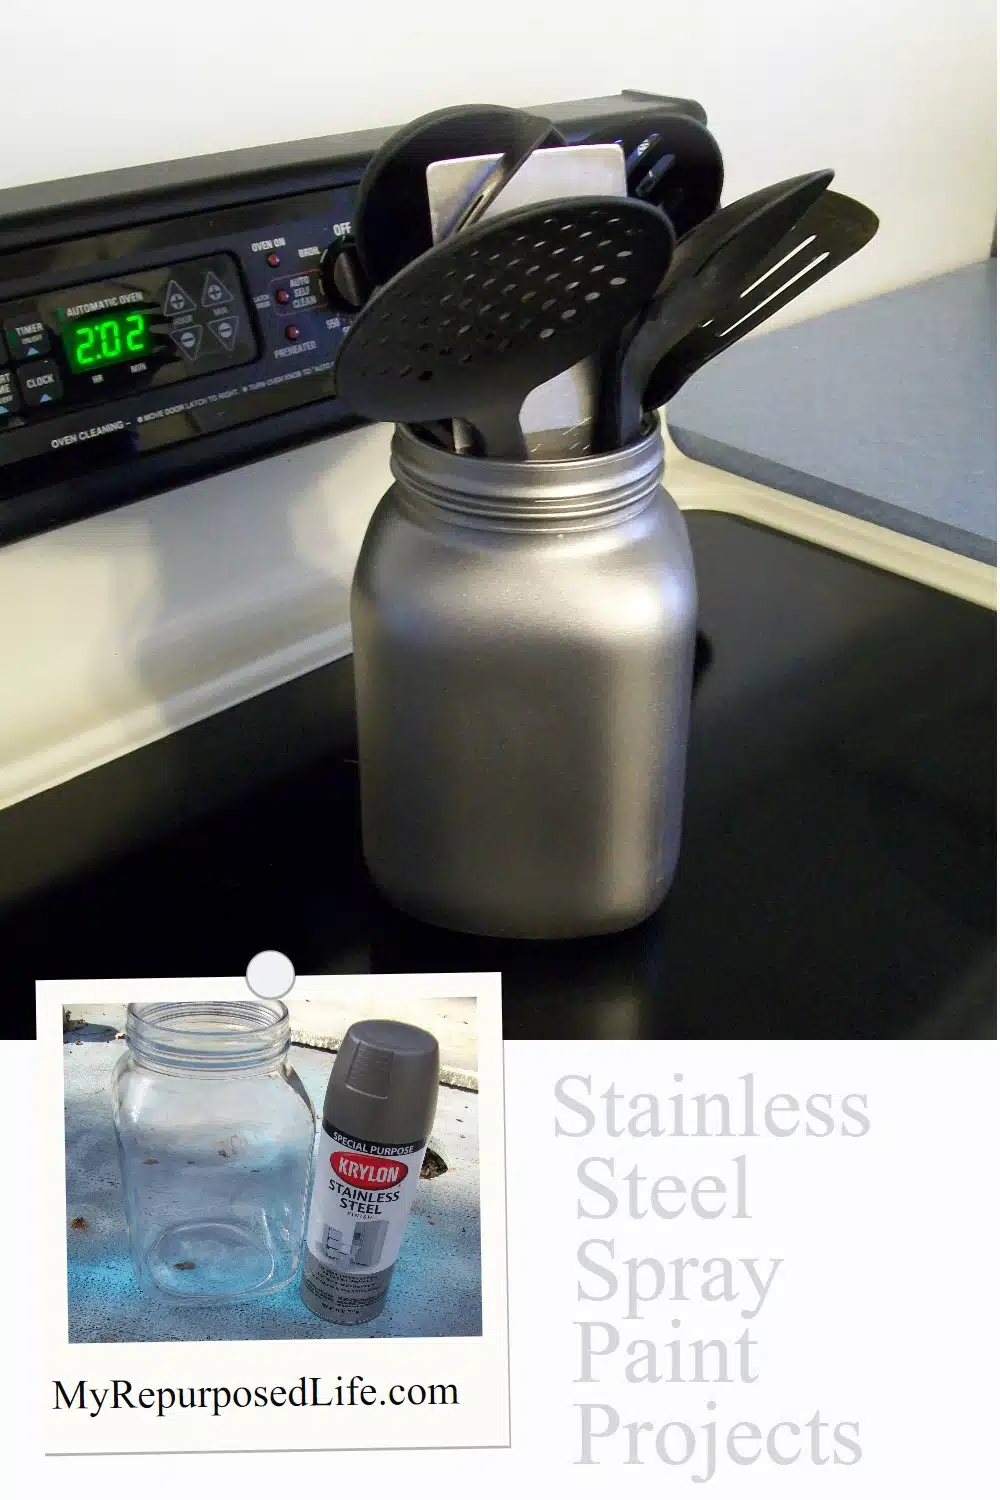 How to use Krylon stainless steel spray paint to update kitchen accessories such as a knife block and a glass utensil holder. #MyRepurposedLife #repurposed #kitchen #accessories #spraypaint #stainlesssteel via @repurposedlife